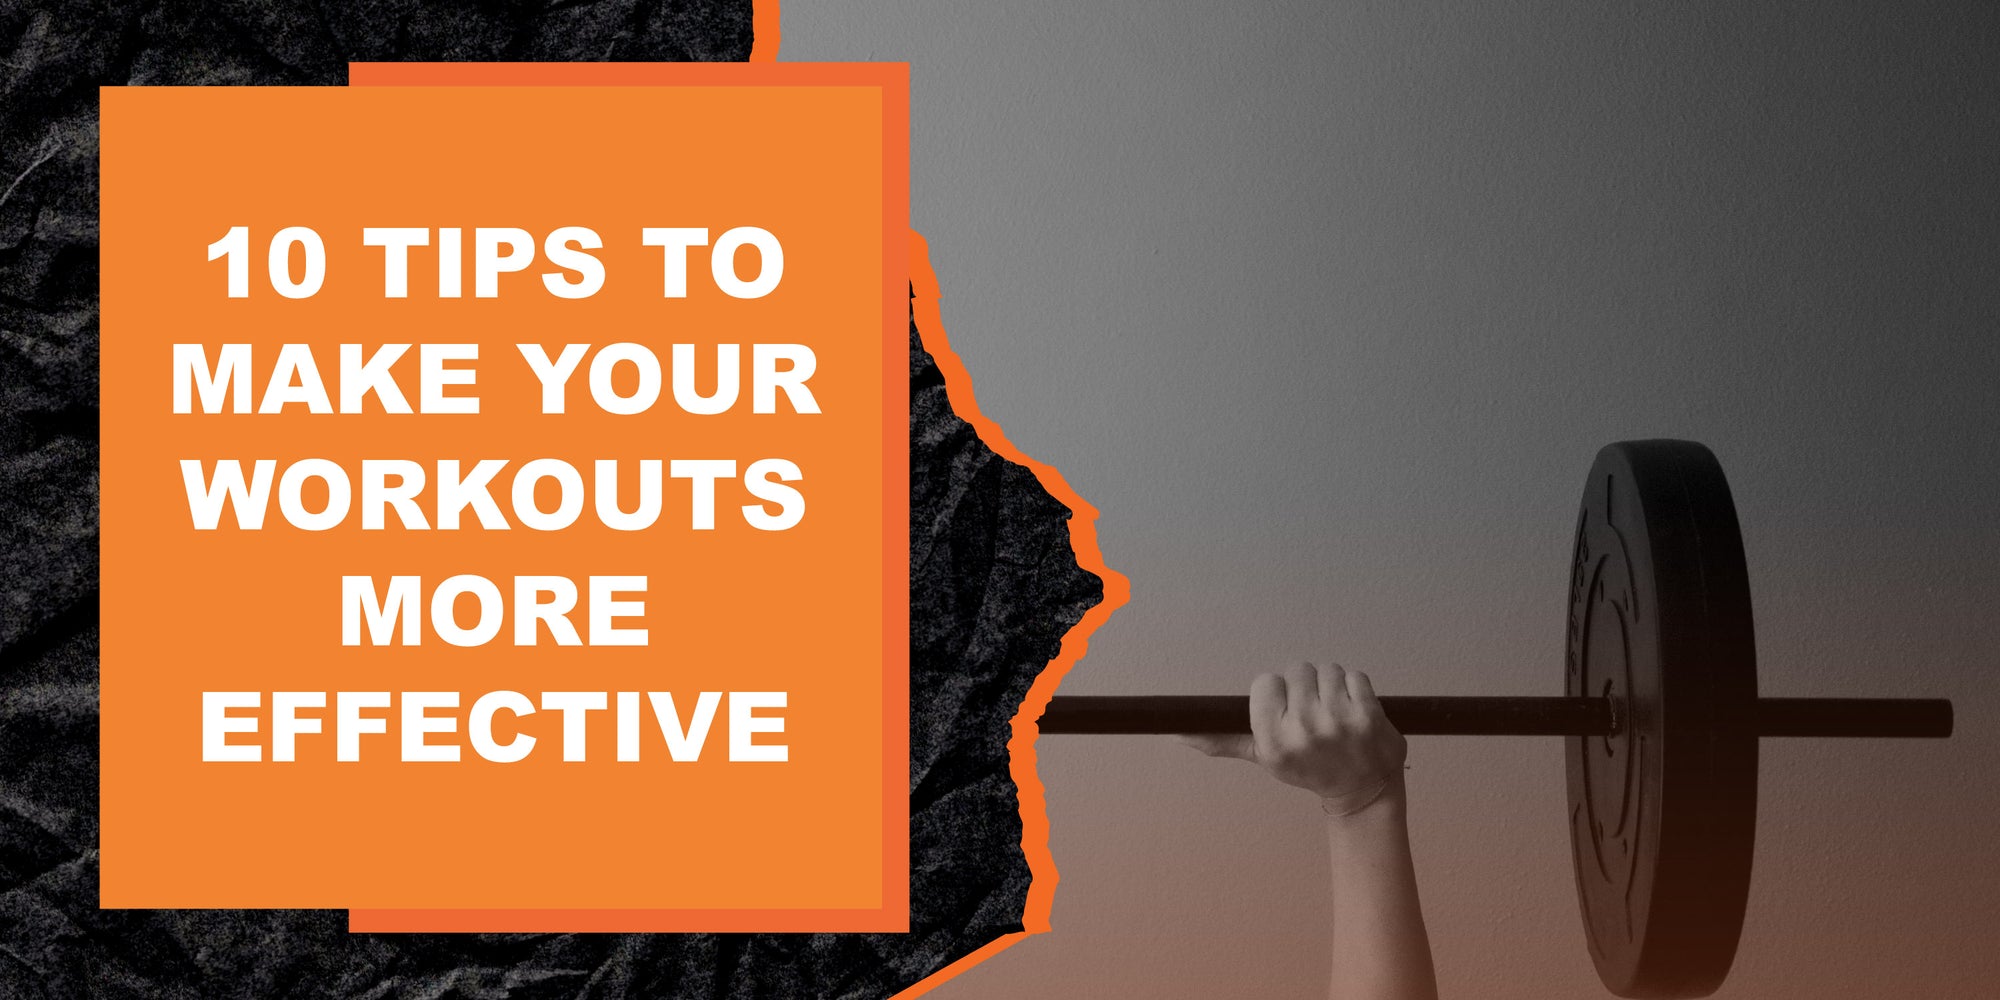 10 Tips to Make Your Workouts More Effective